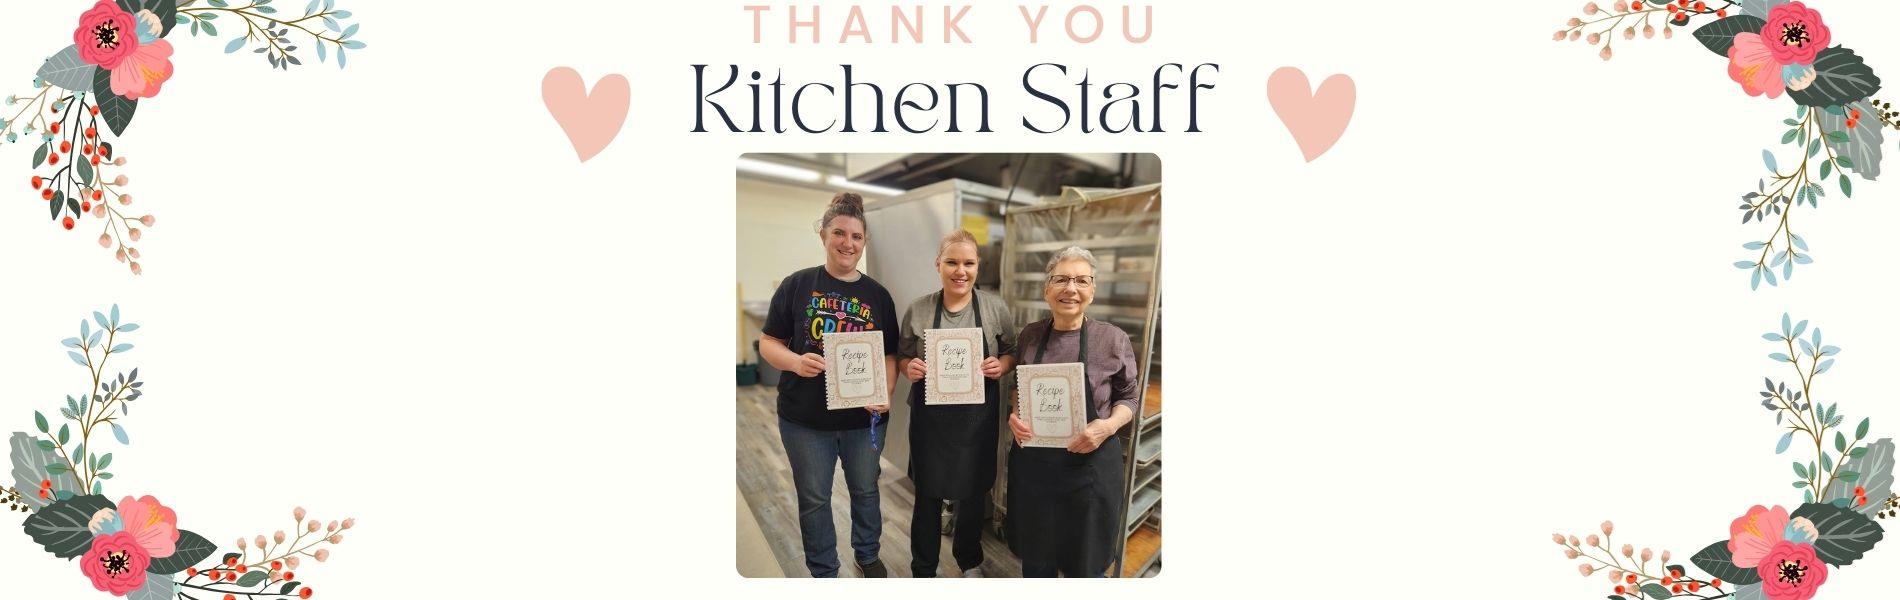 images of staff with recipe books in kitchen